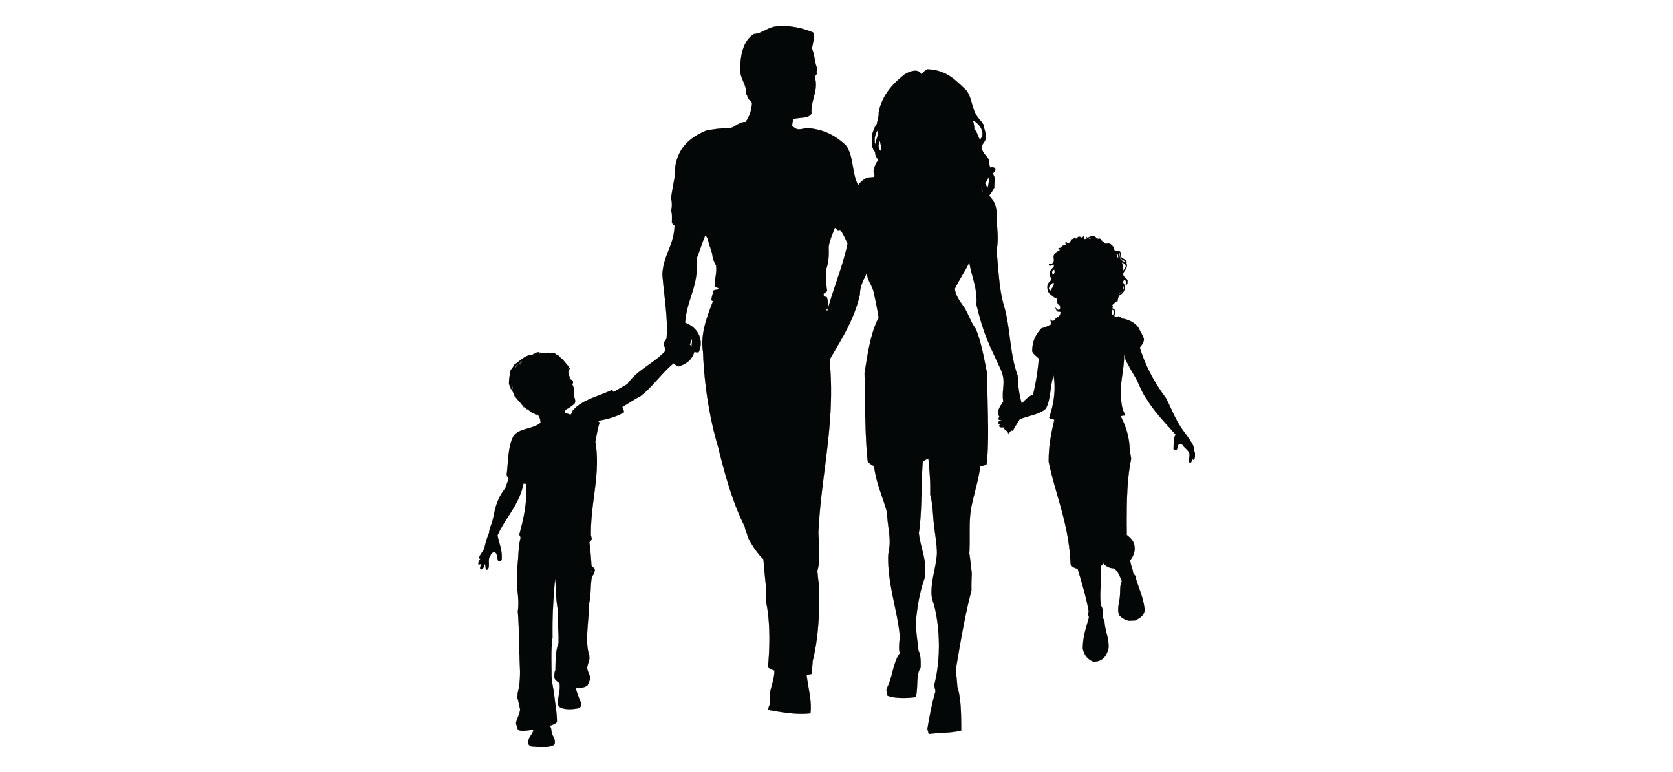 Family silhouette clipart 